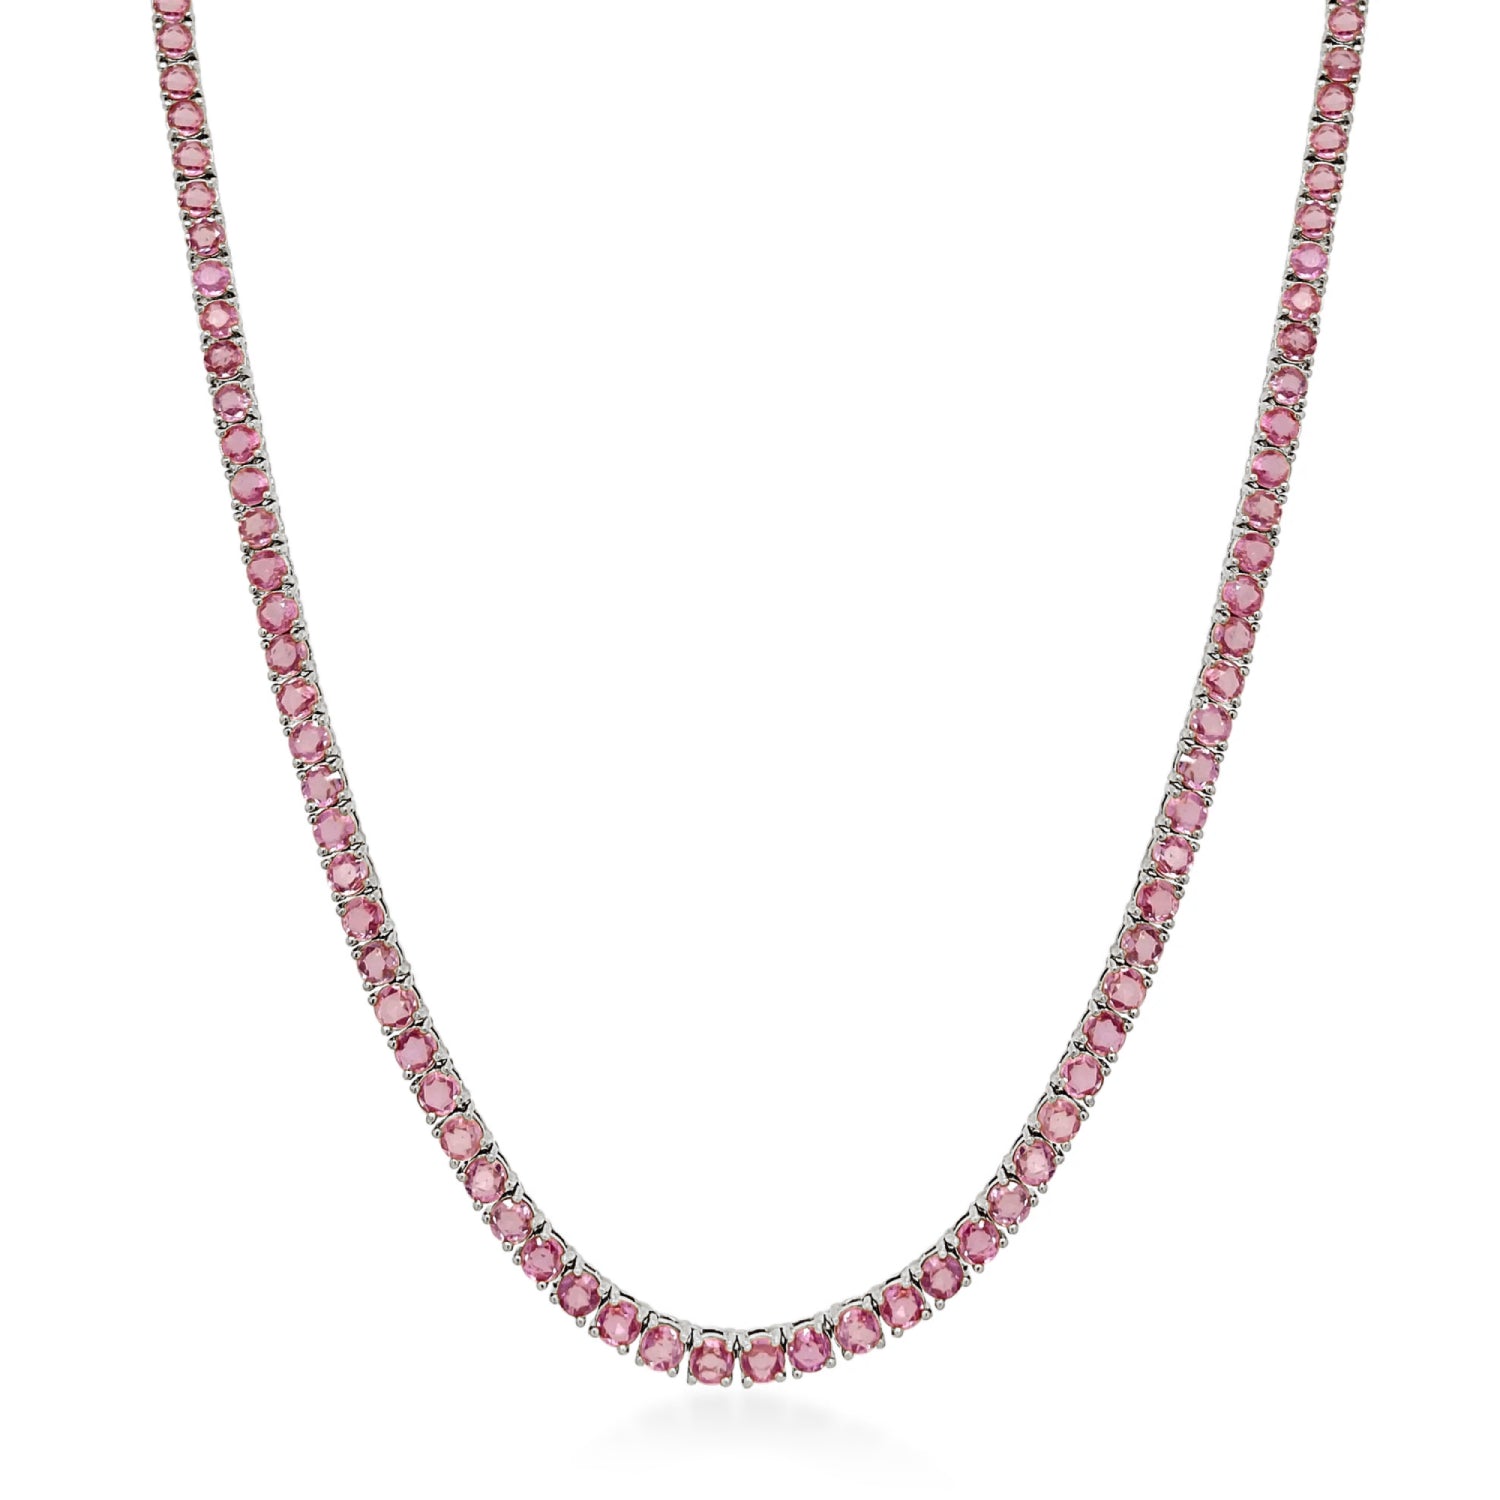 Round Cut Pink Sapphire Tennis Necklace in White Gold